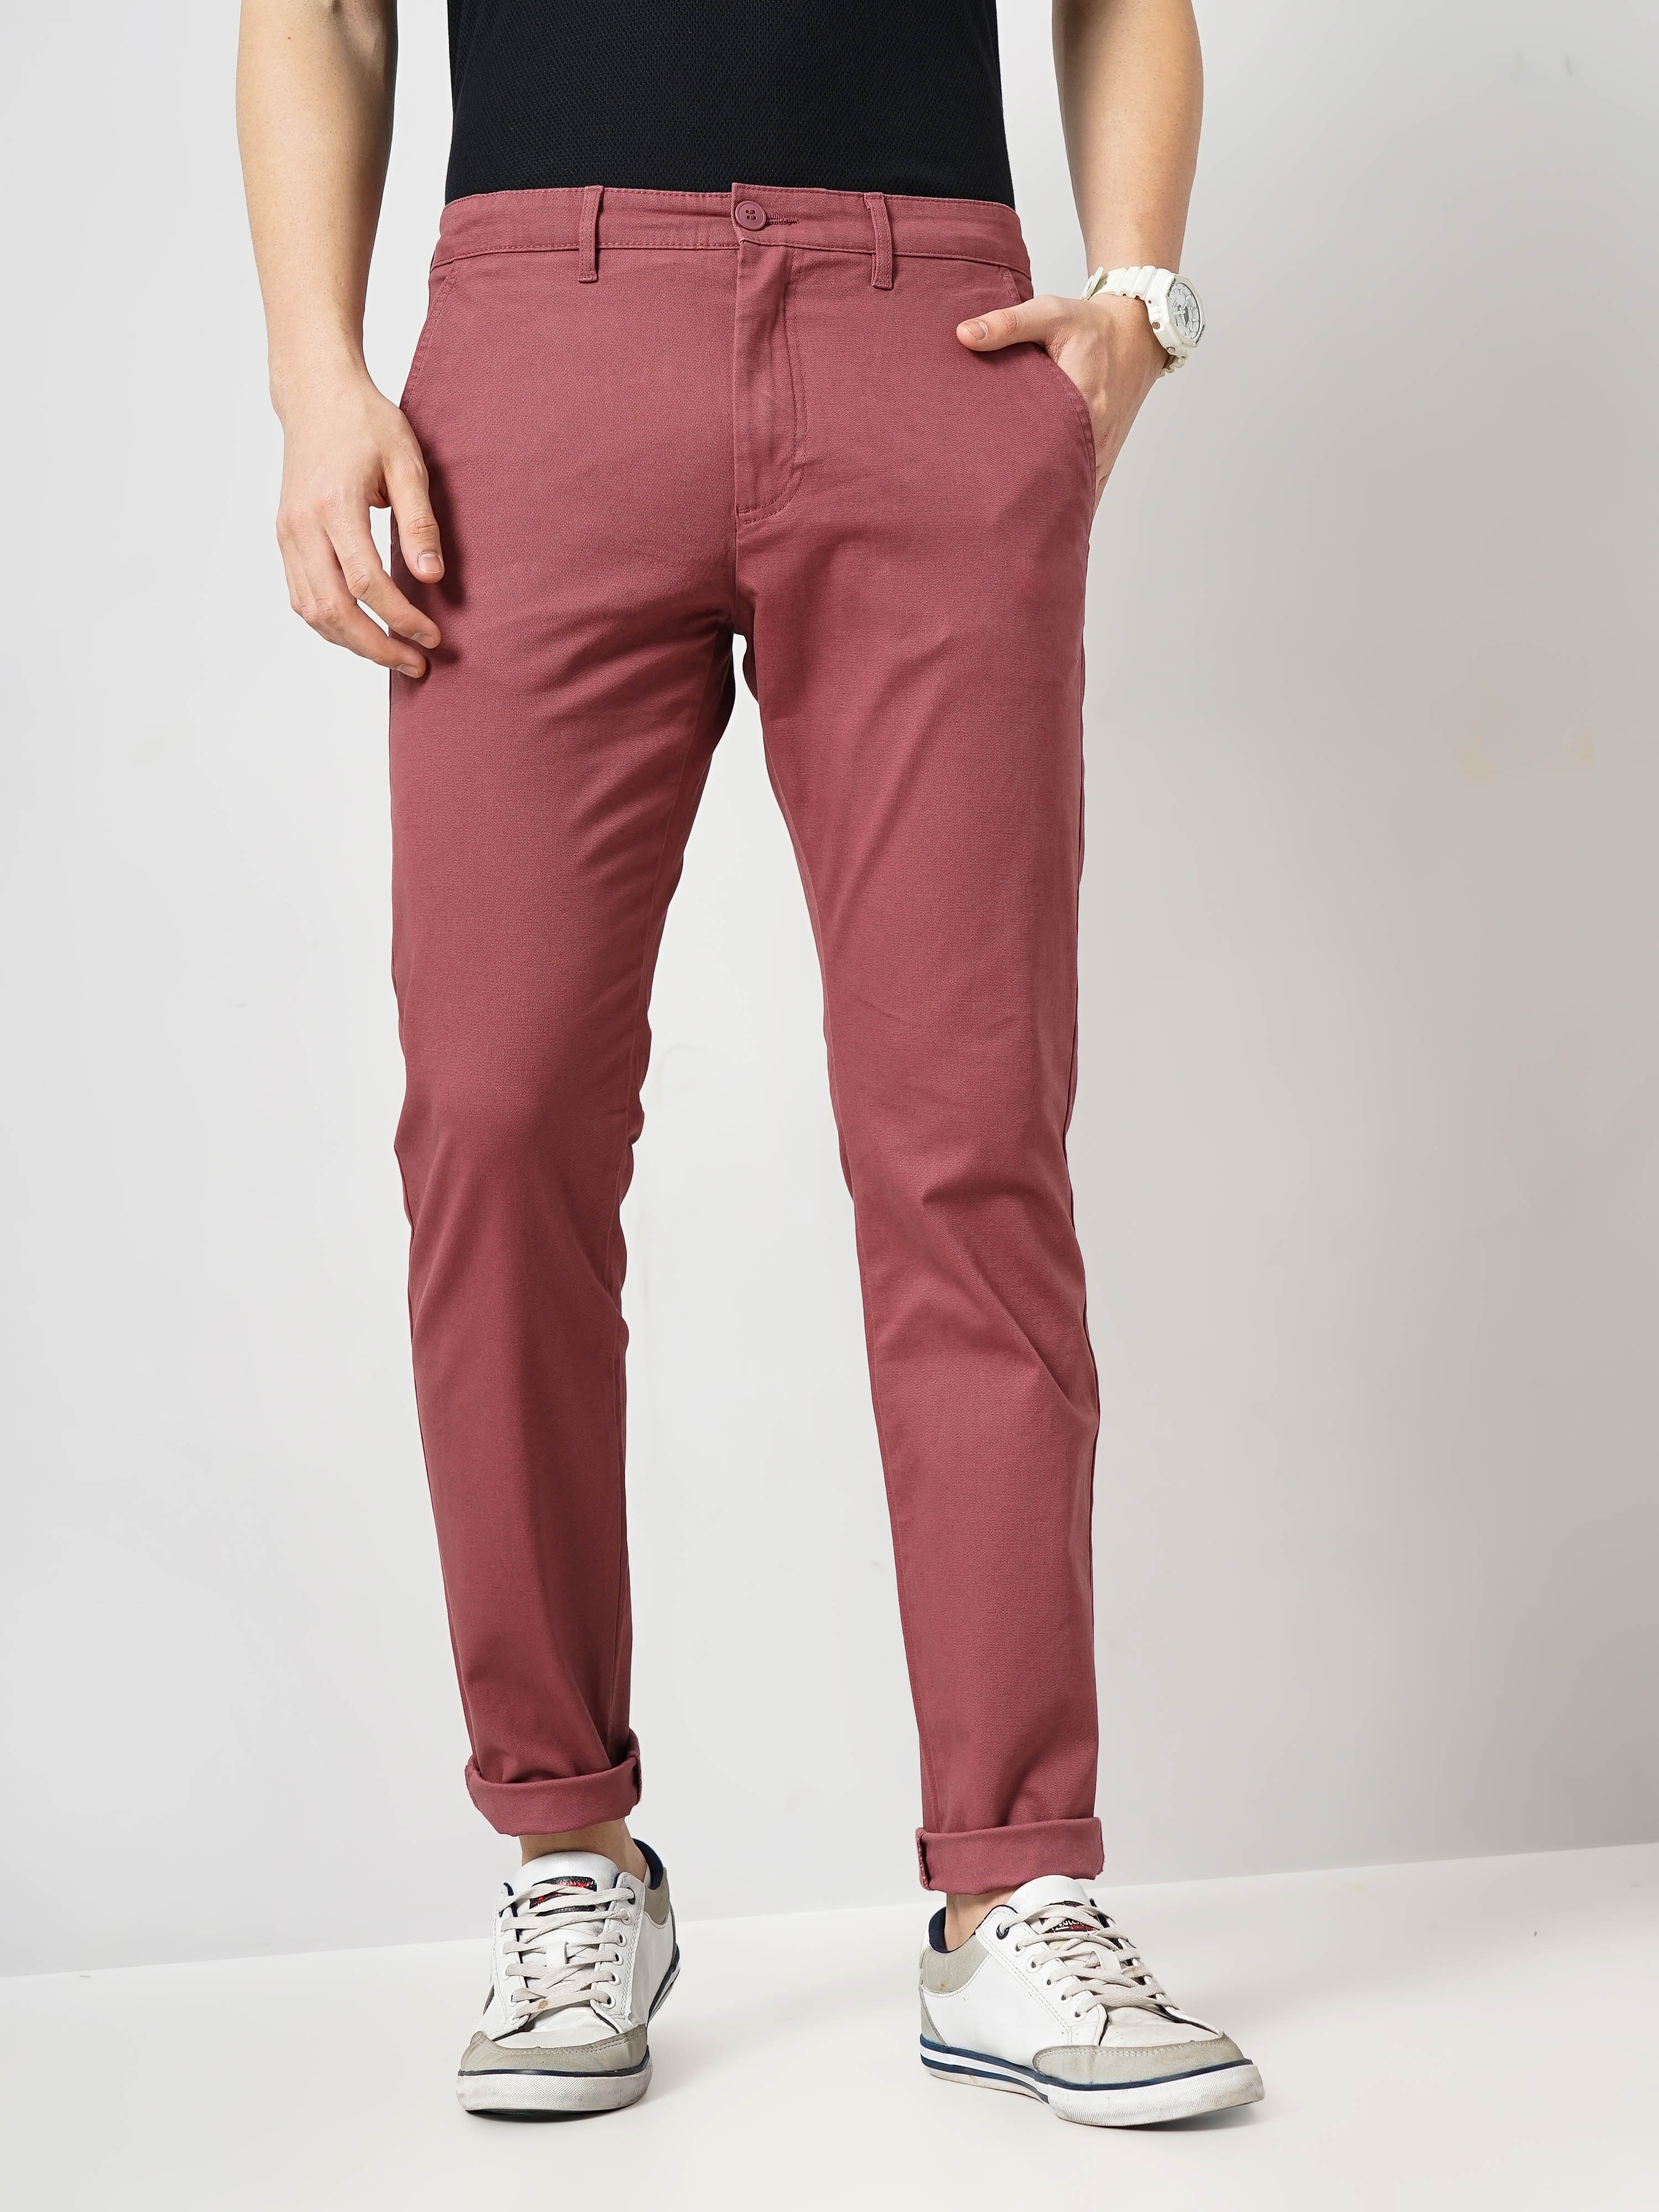 Buy Mens Casual Chinos Trousers Cream and Maroon Combo of 2 PV Cotton for  Best Price, Reviews, Free Shipping